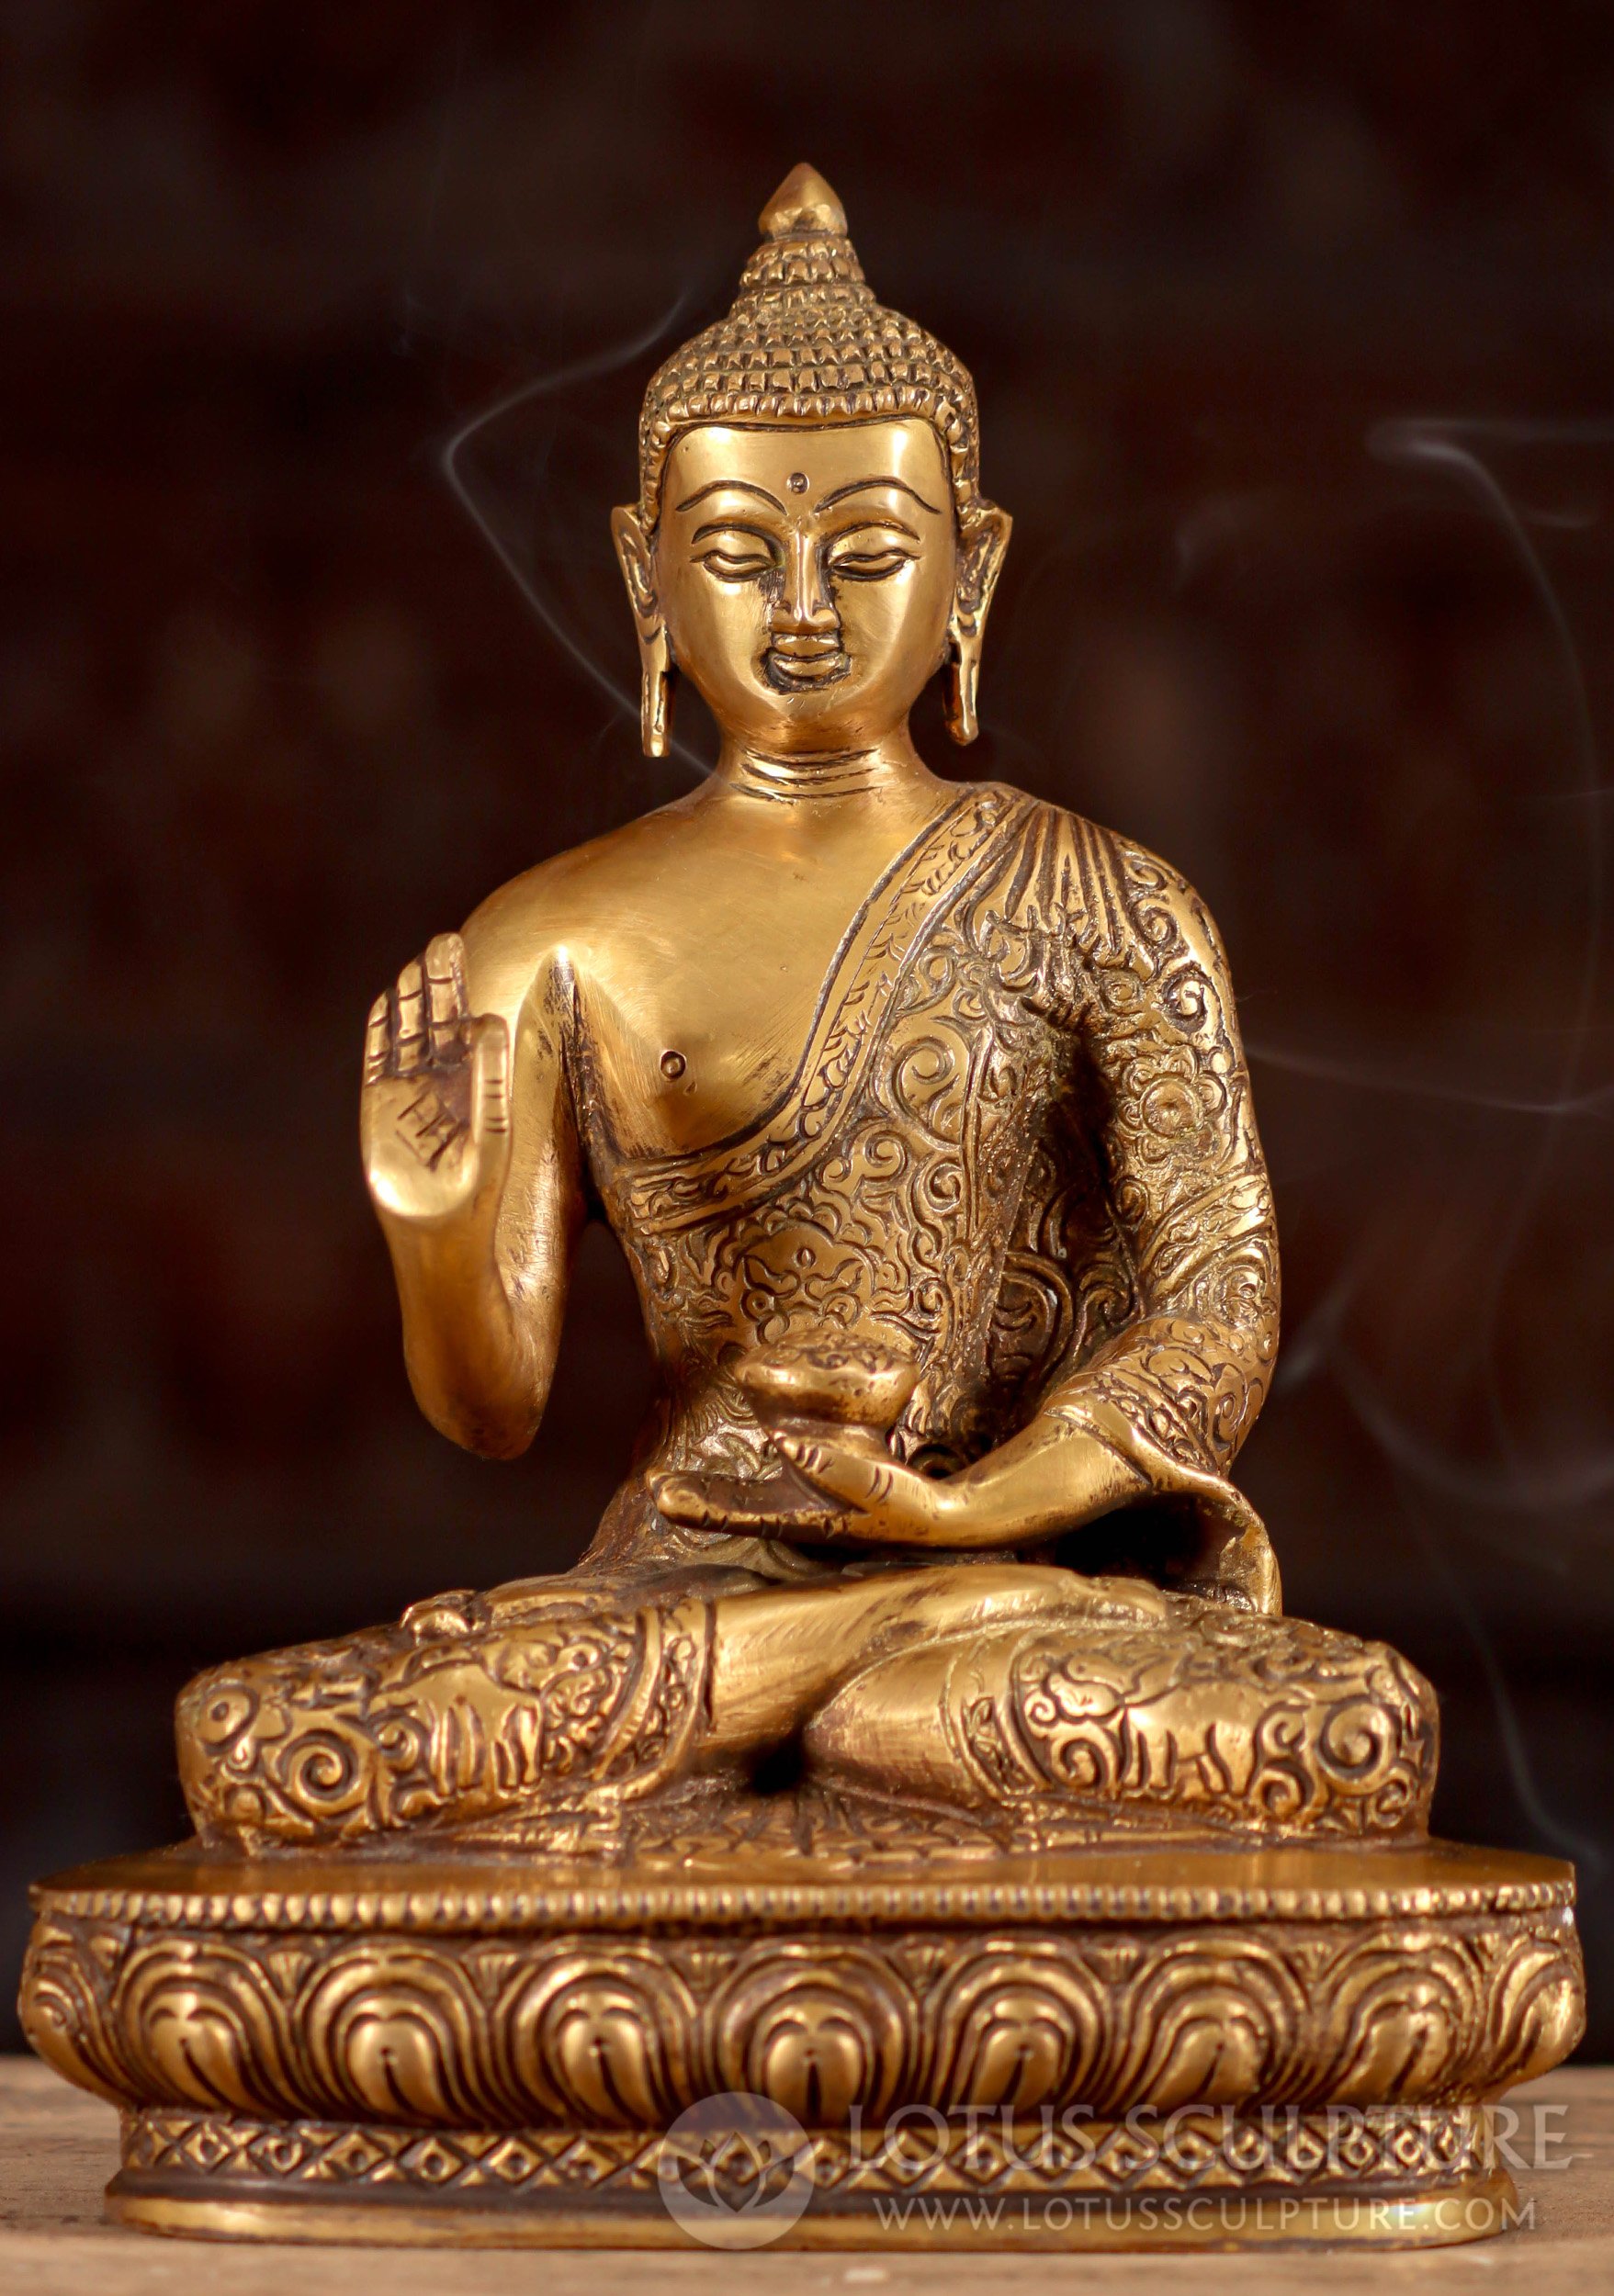 8 Buddha Hand Gestures (Mudras) and Their Meanings - Owlcation